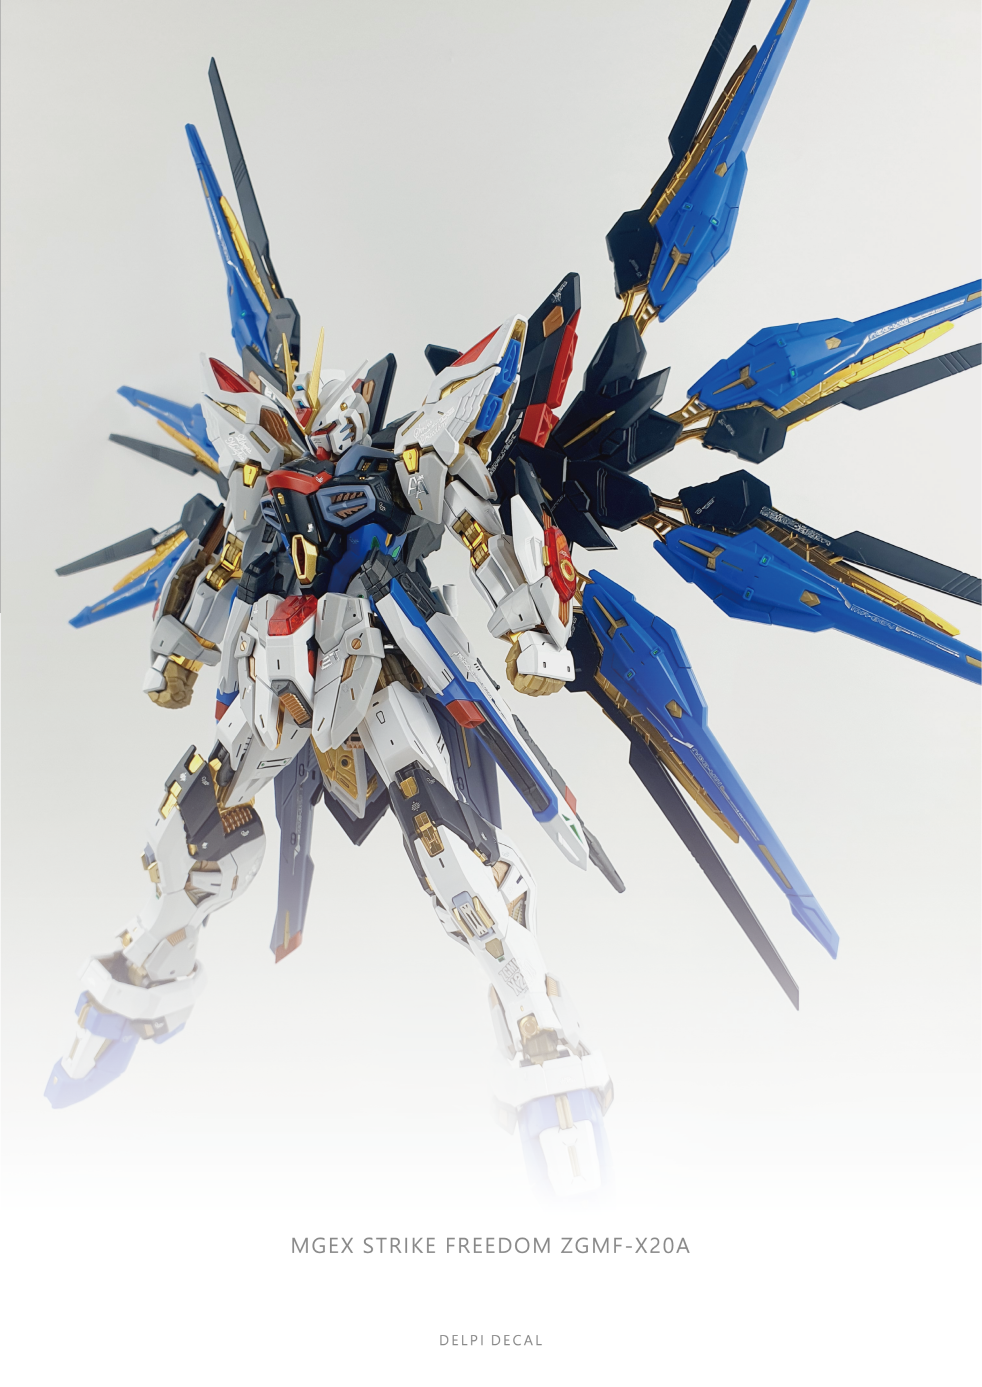 Delpi - MGEX STRIKE FREEDOM WATER DECAL - (Select from various styles)